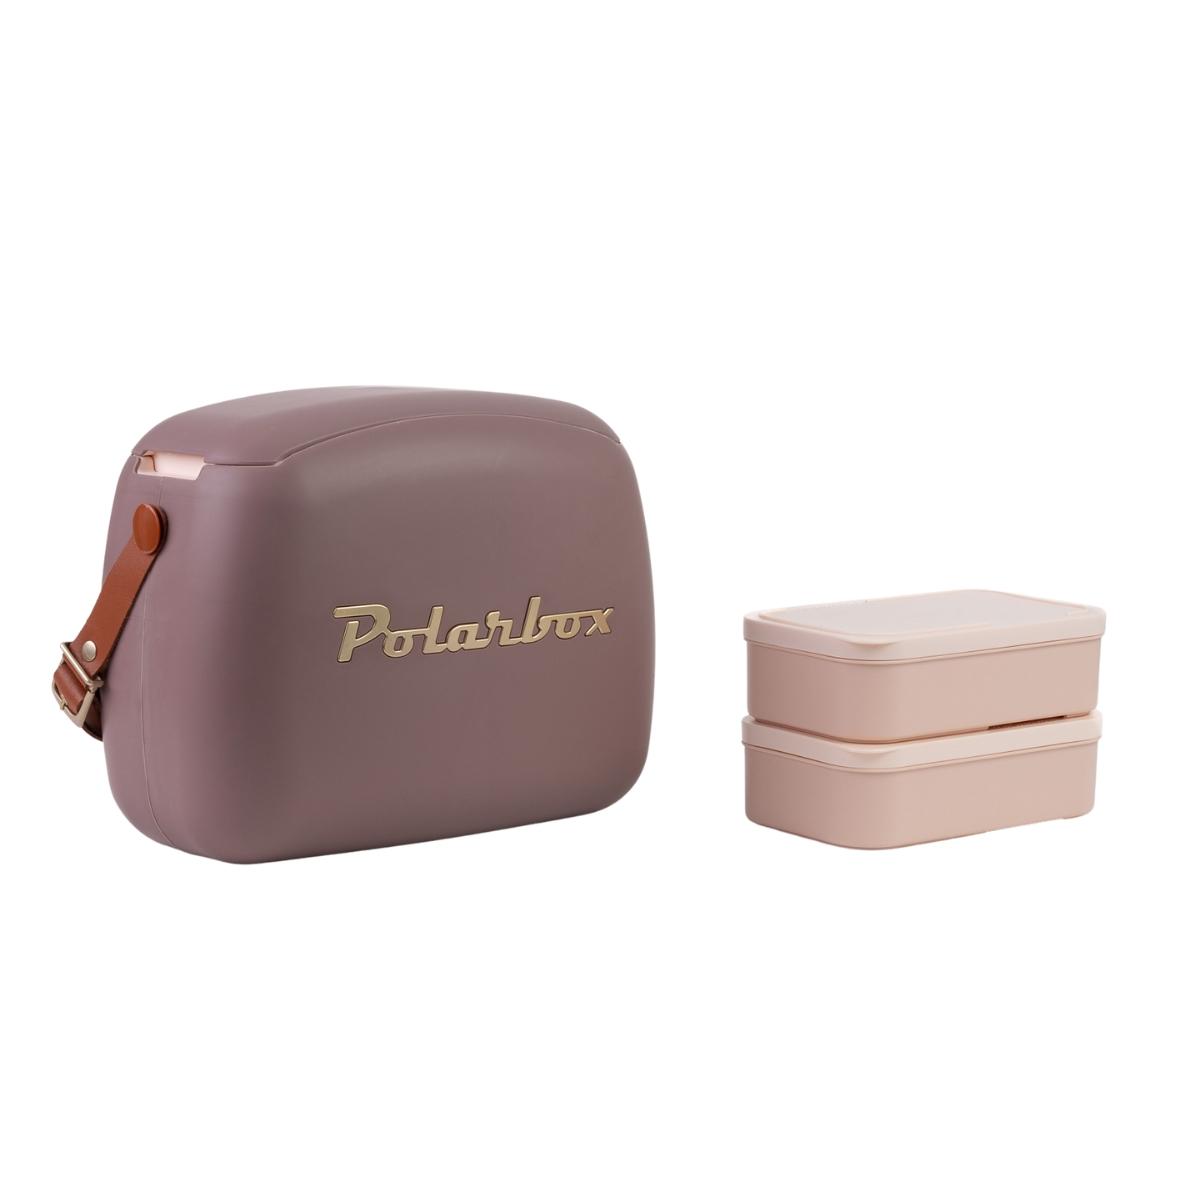 Polarbox 6 Liters Urban Cooler Bag with 2 Containers Mauve Gold Mauve